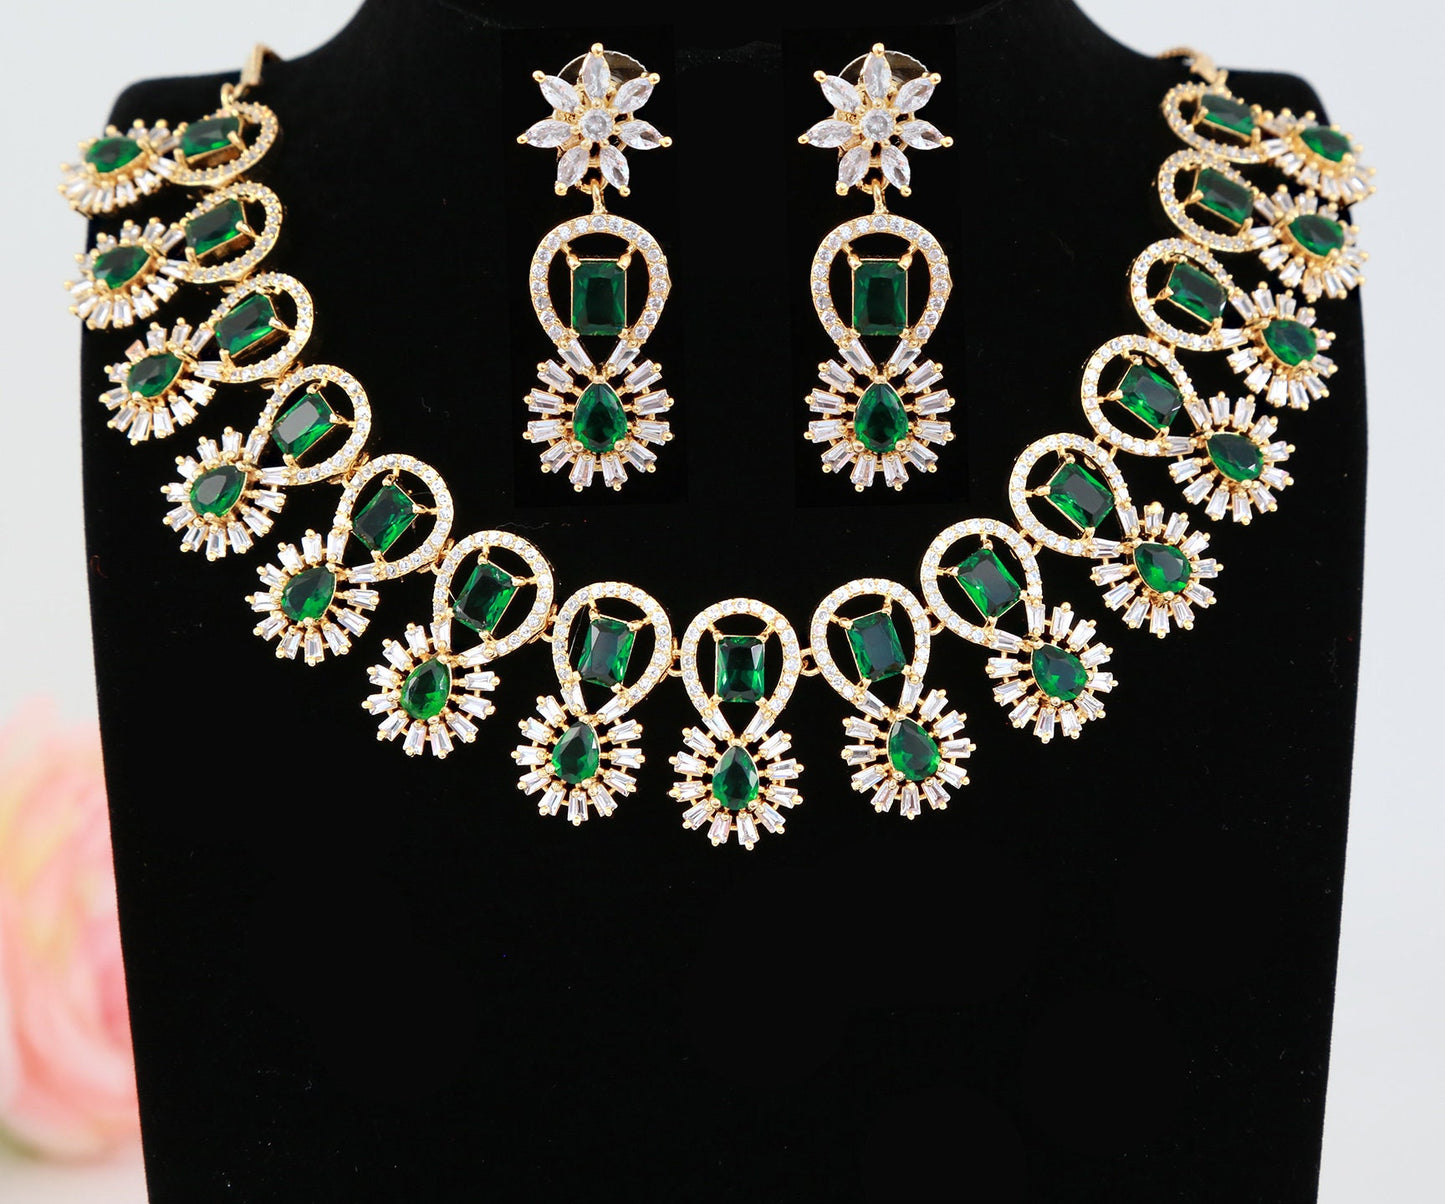 American diamond necklace set | Gold plated cubic zirconia necklace | Emerald green stone gold necklace designs | Indian Wedding Jewelry